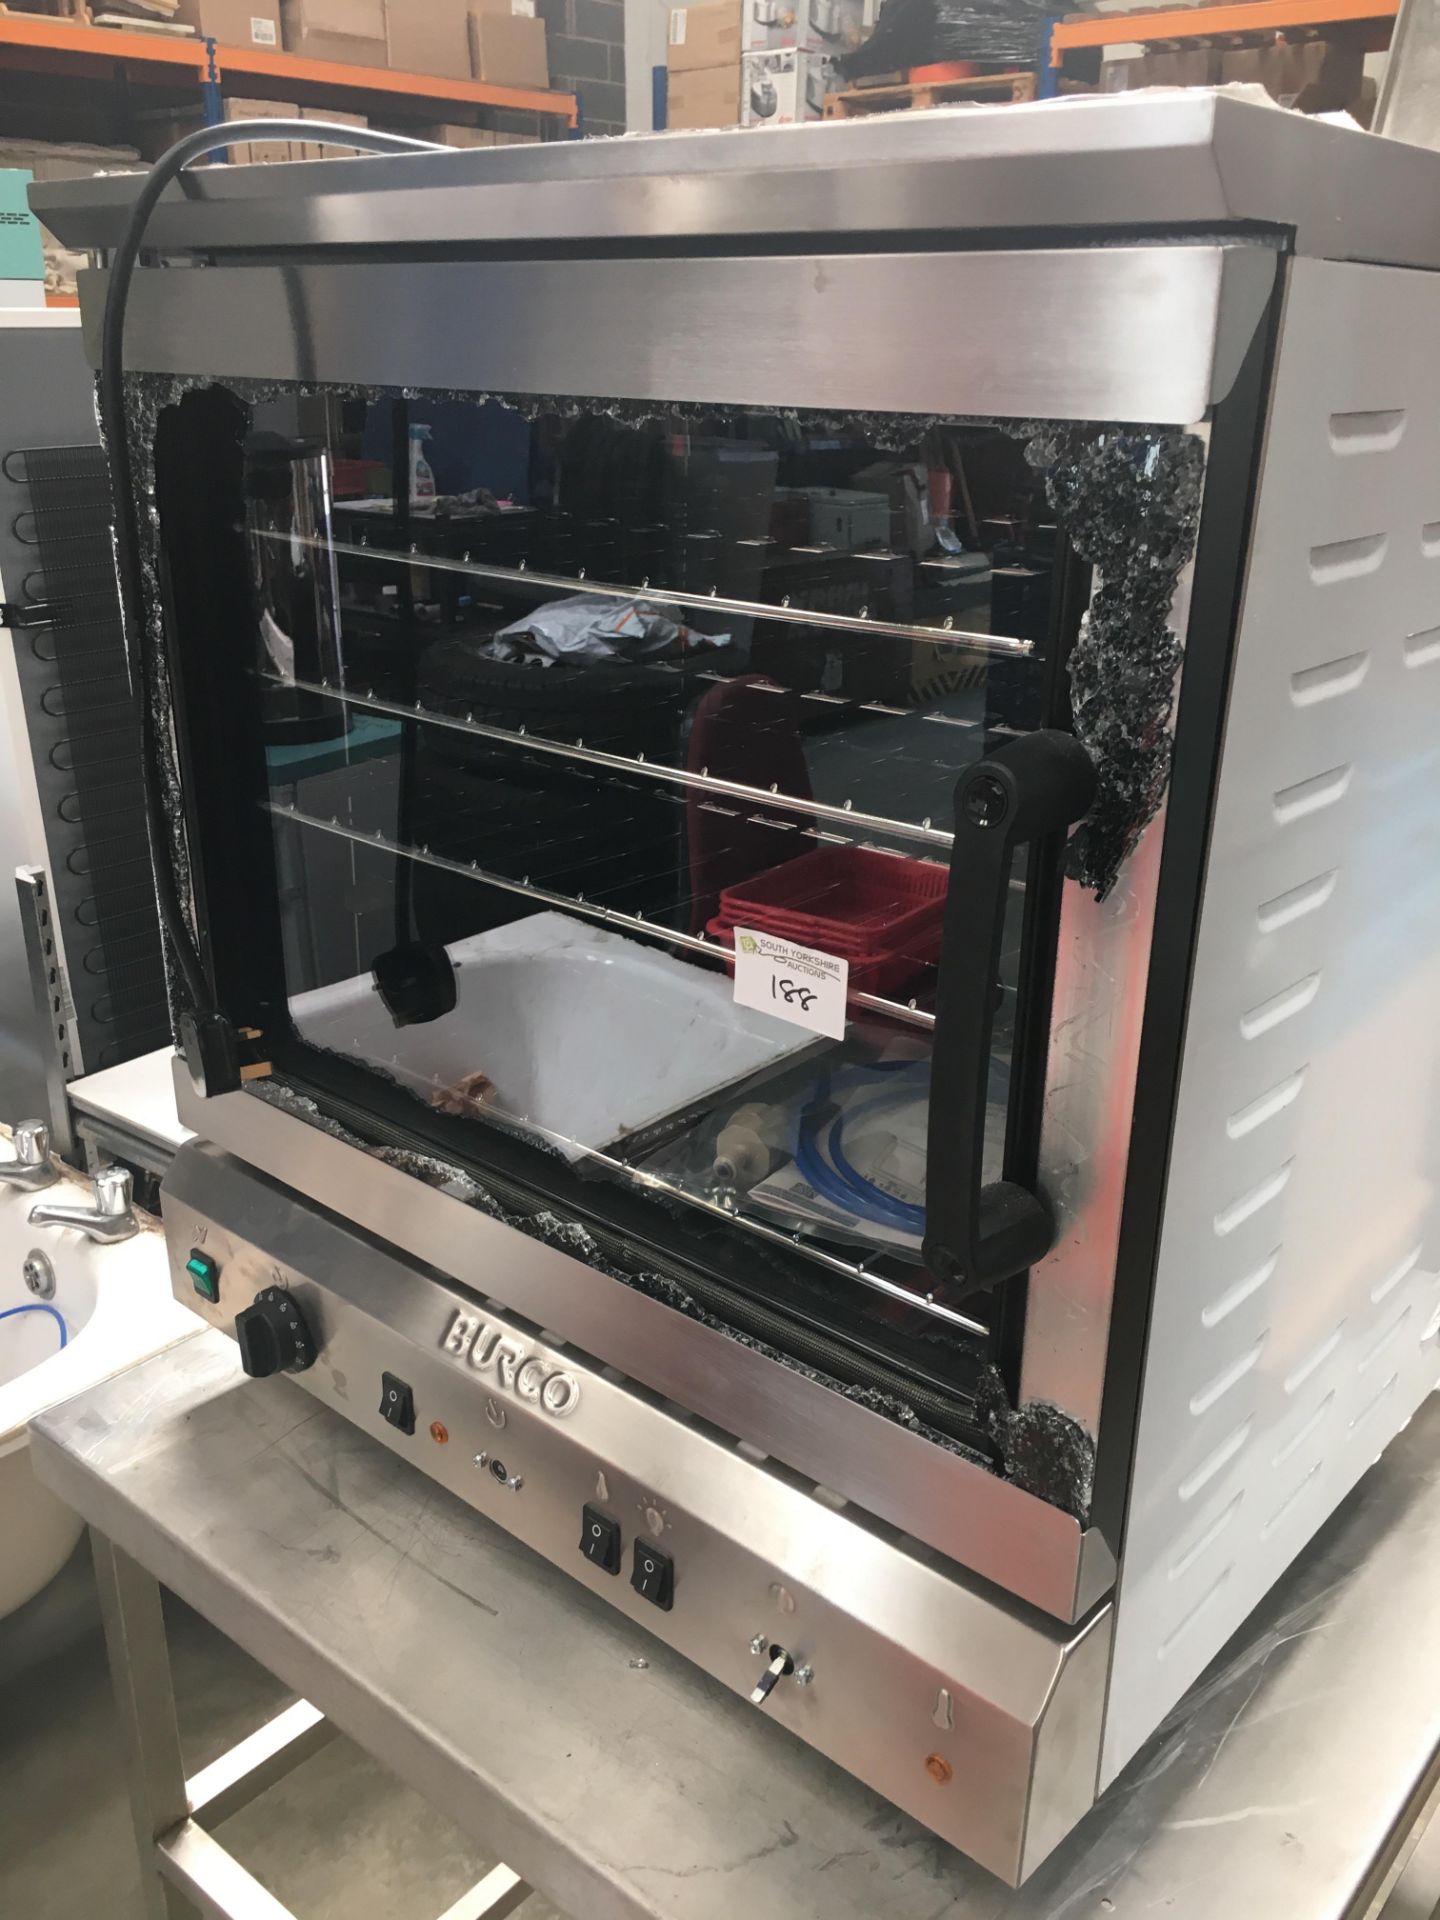 Burco Electric 3 Kw Convection Oven